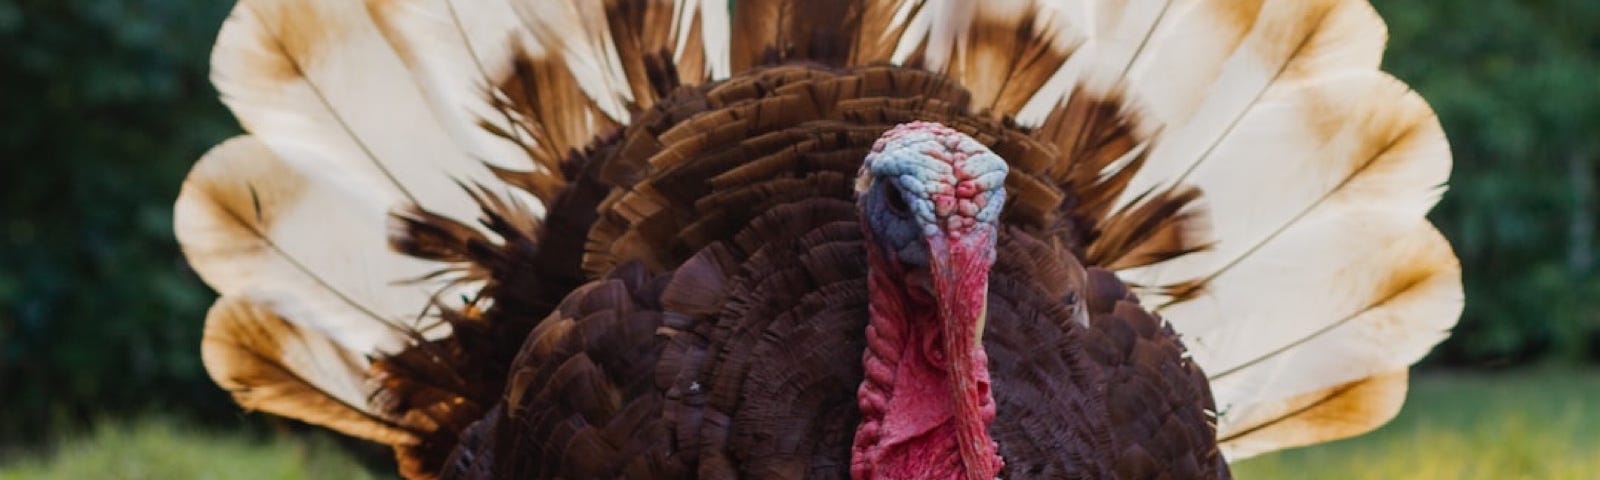 A very large turkey has its feathers on display.